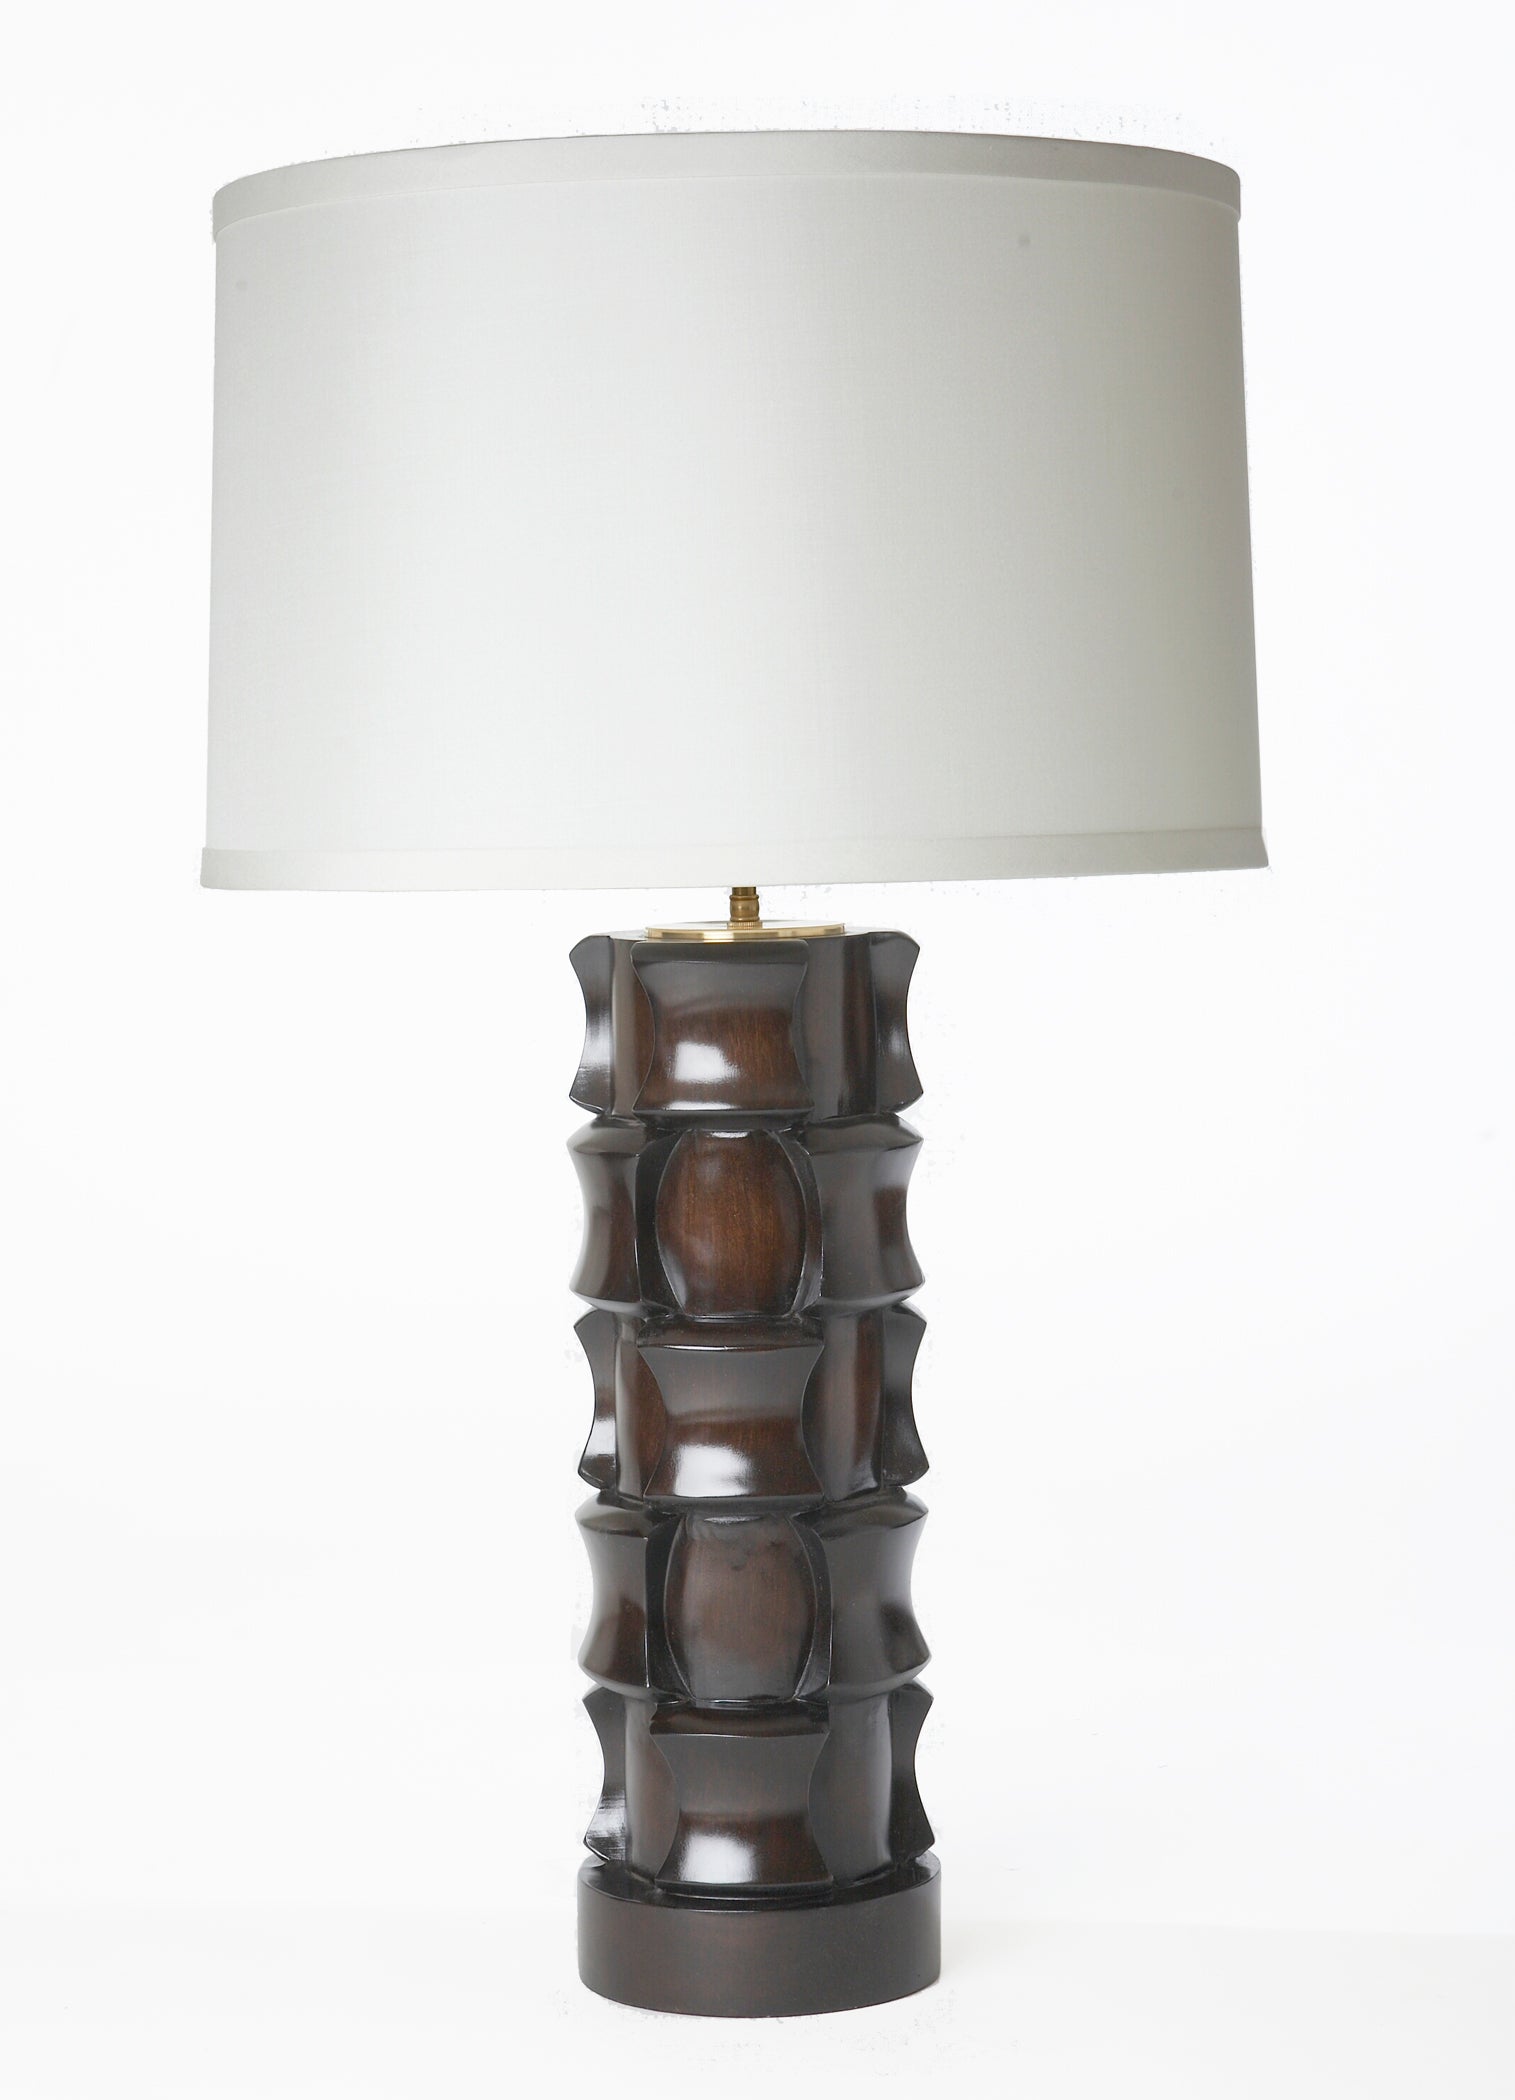 Downtown Classics Collection Bronson Lamp For Sale